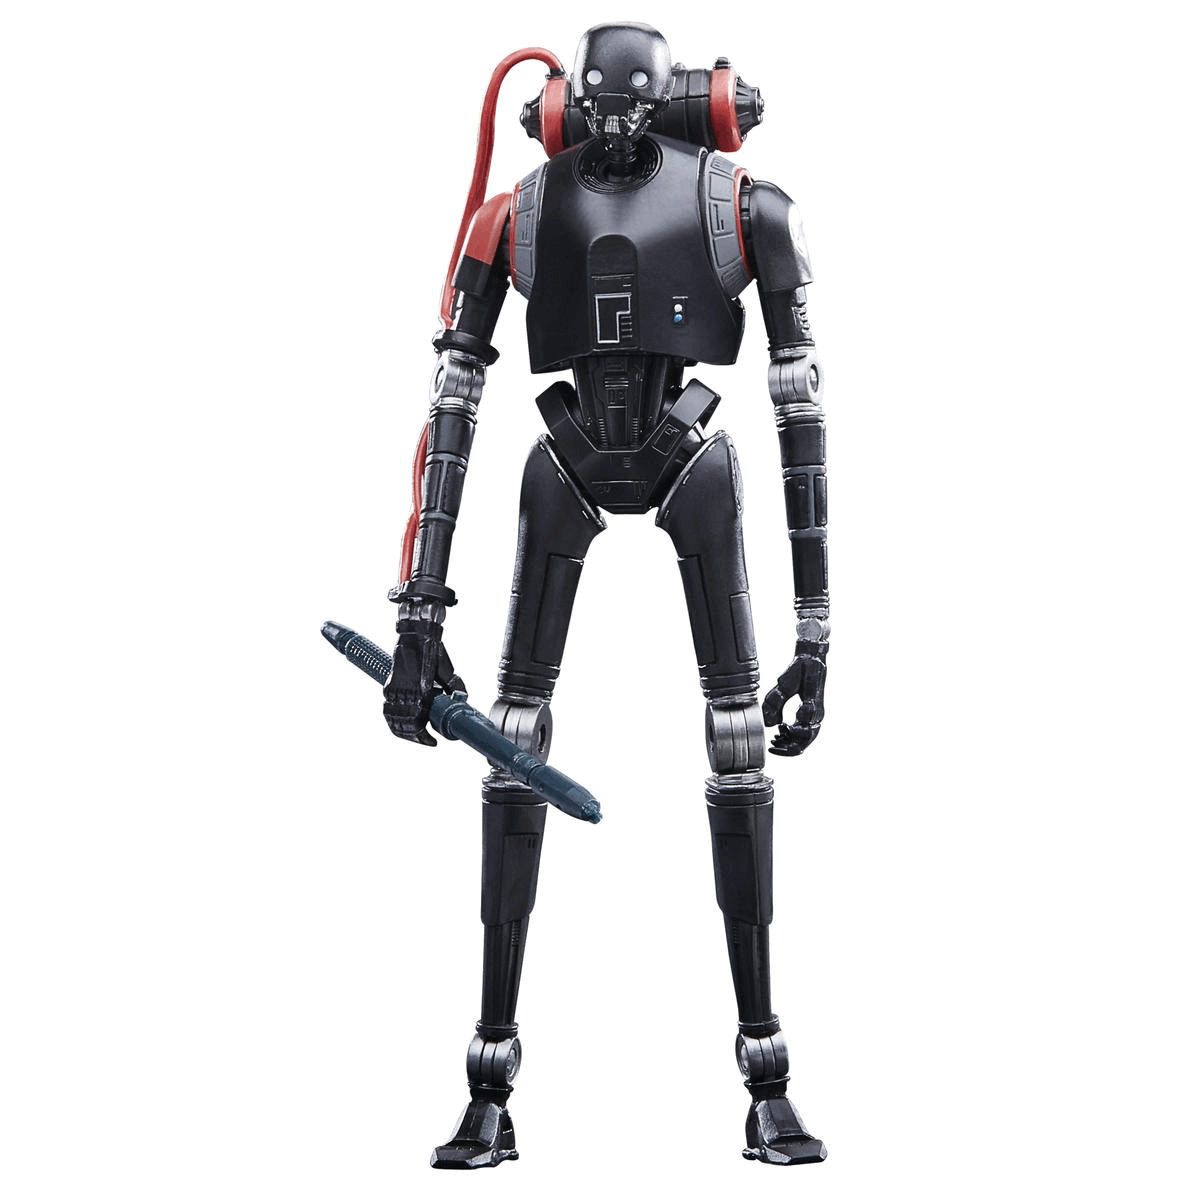 Droid figure gif showing the figure in  multiple poses